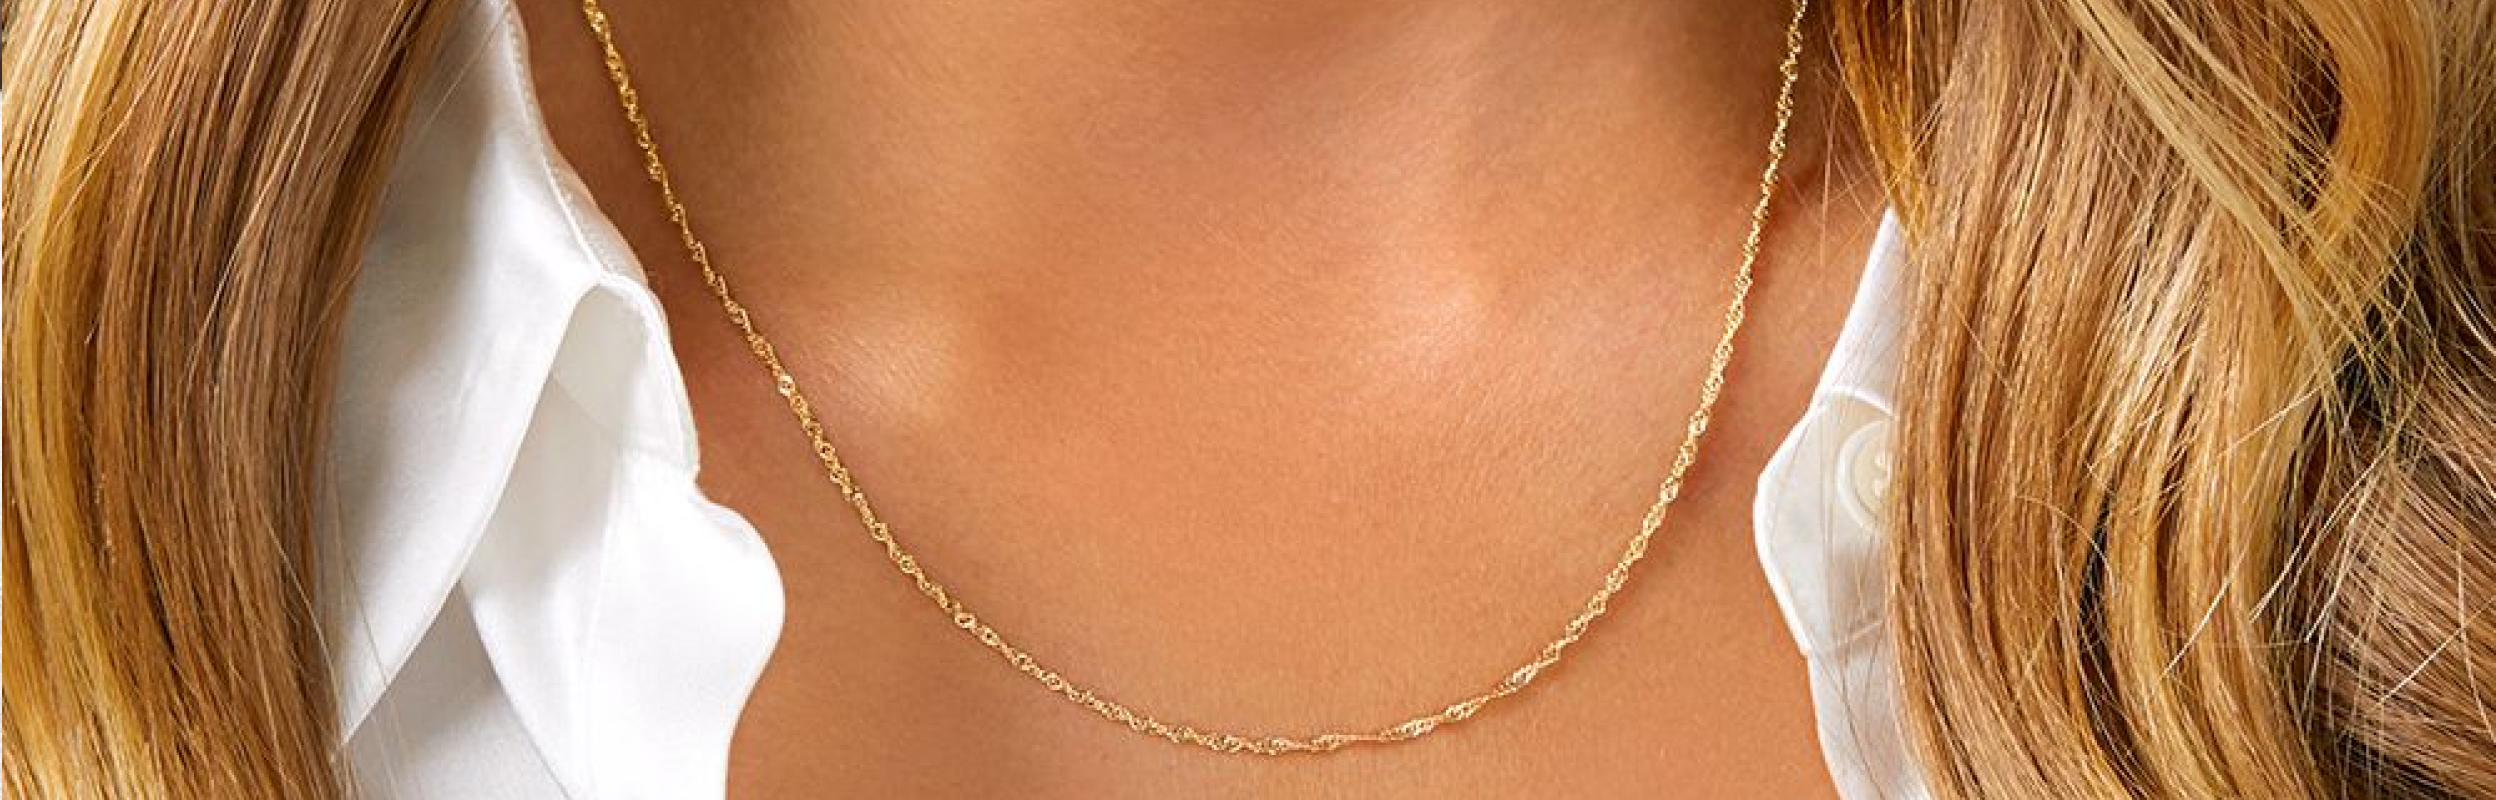 gold singapore chain worn by woman